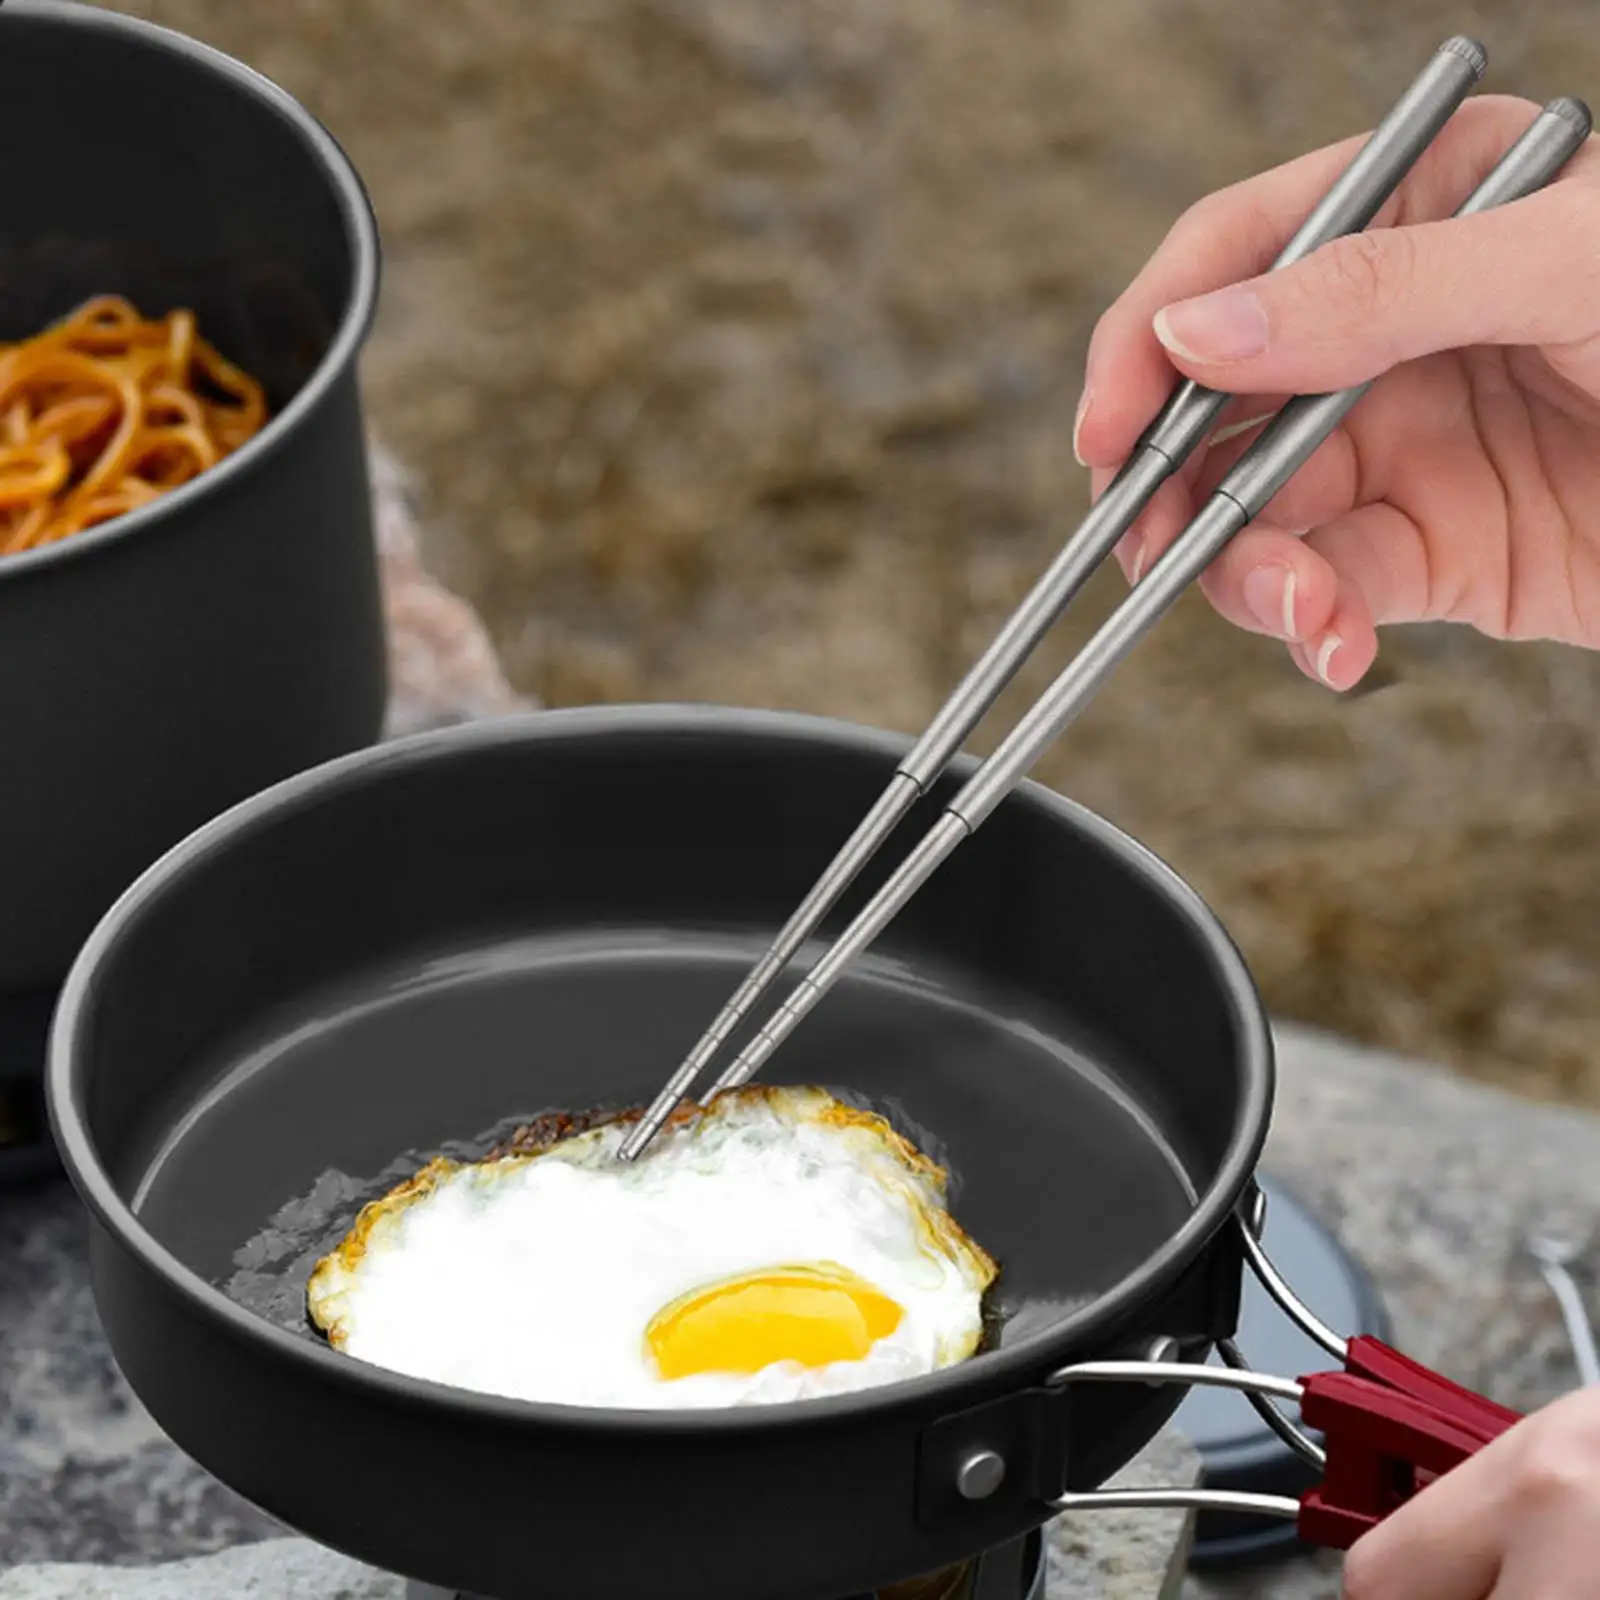 Portable Titanium Folding Chopsticks Cutlery Metal for Camping Outdoor Daily